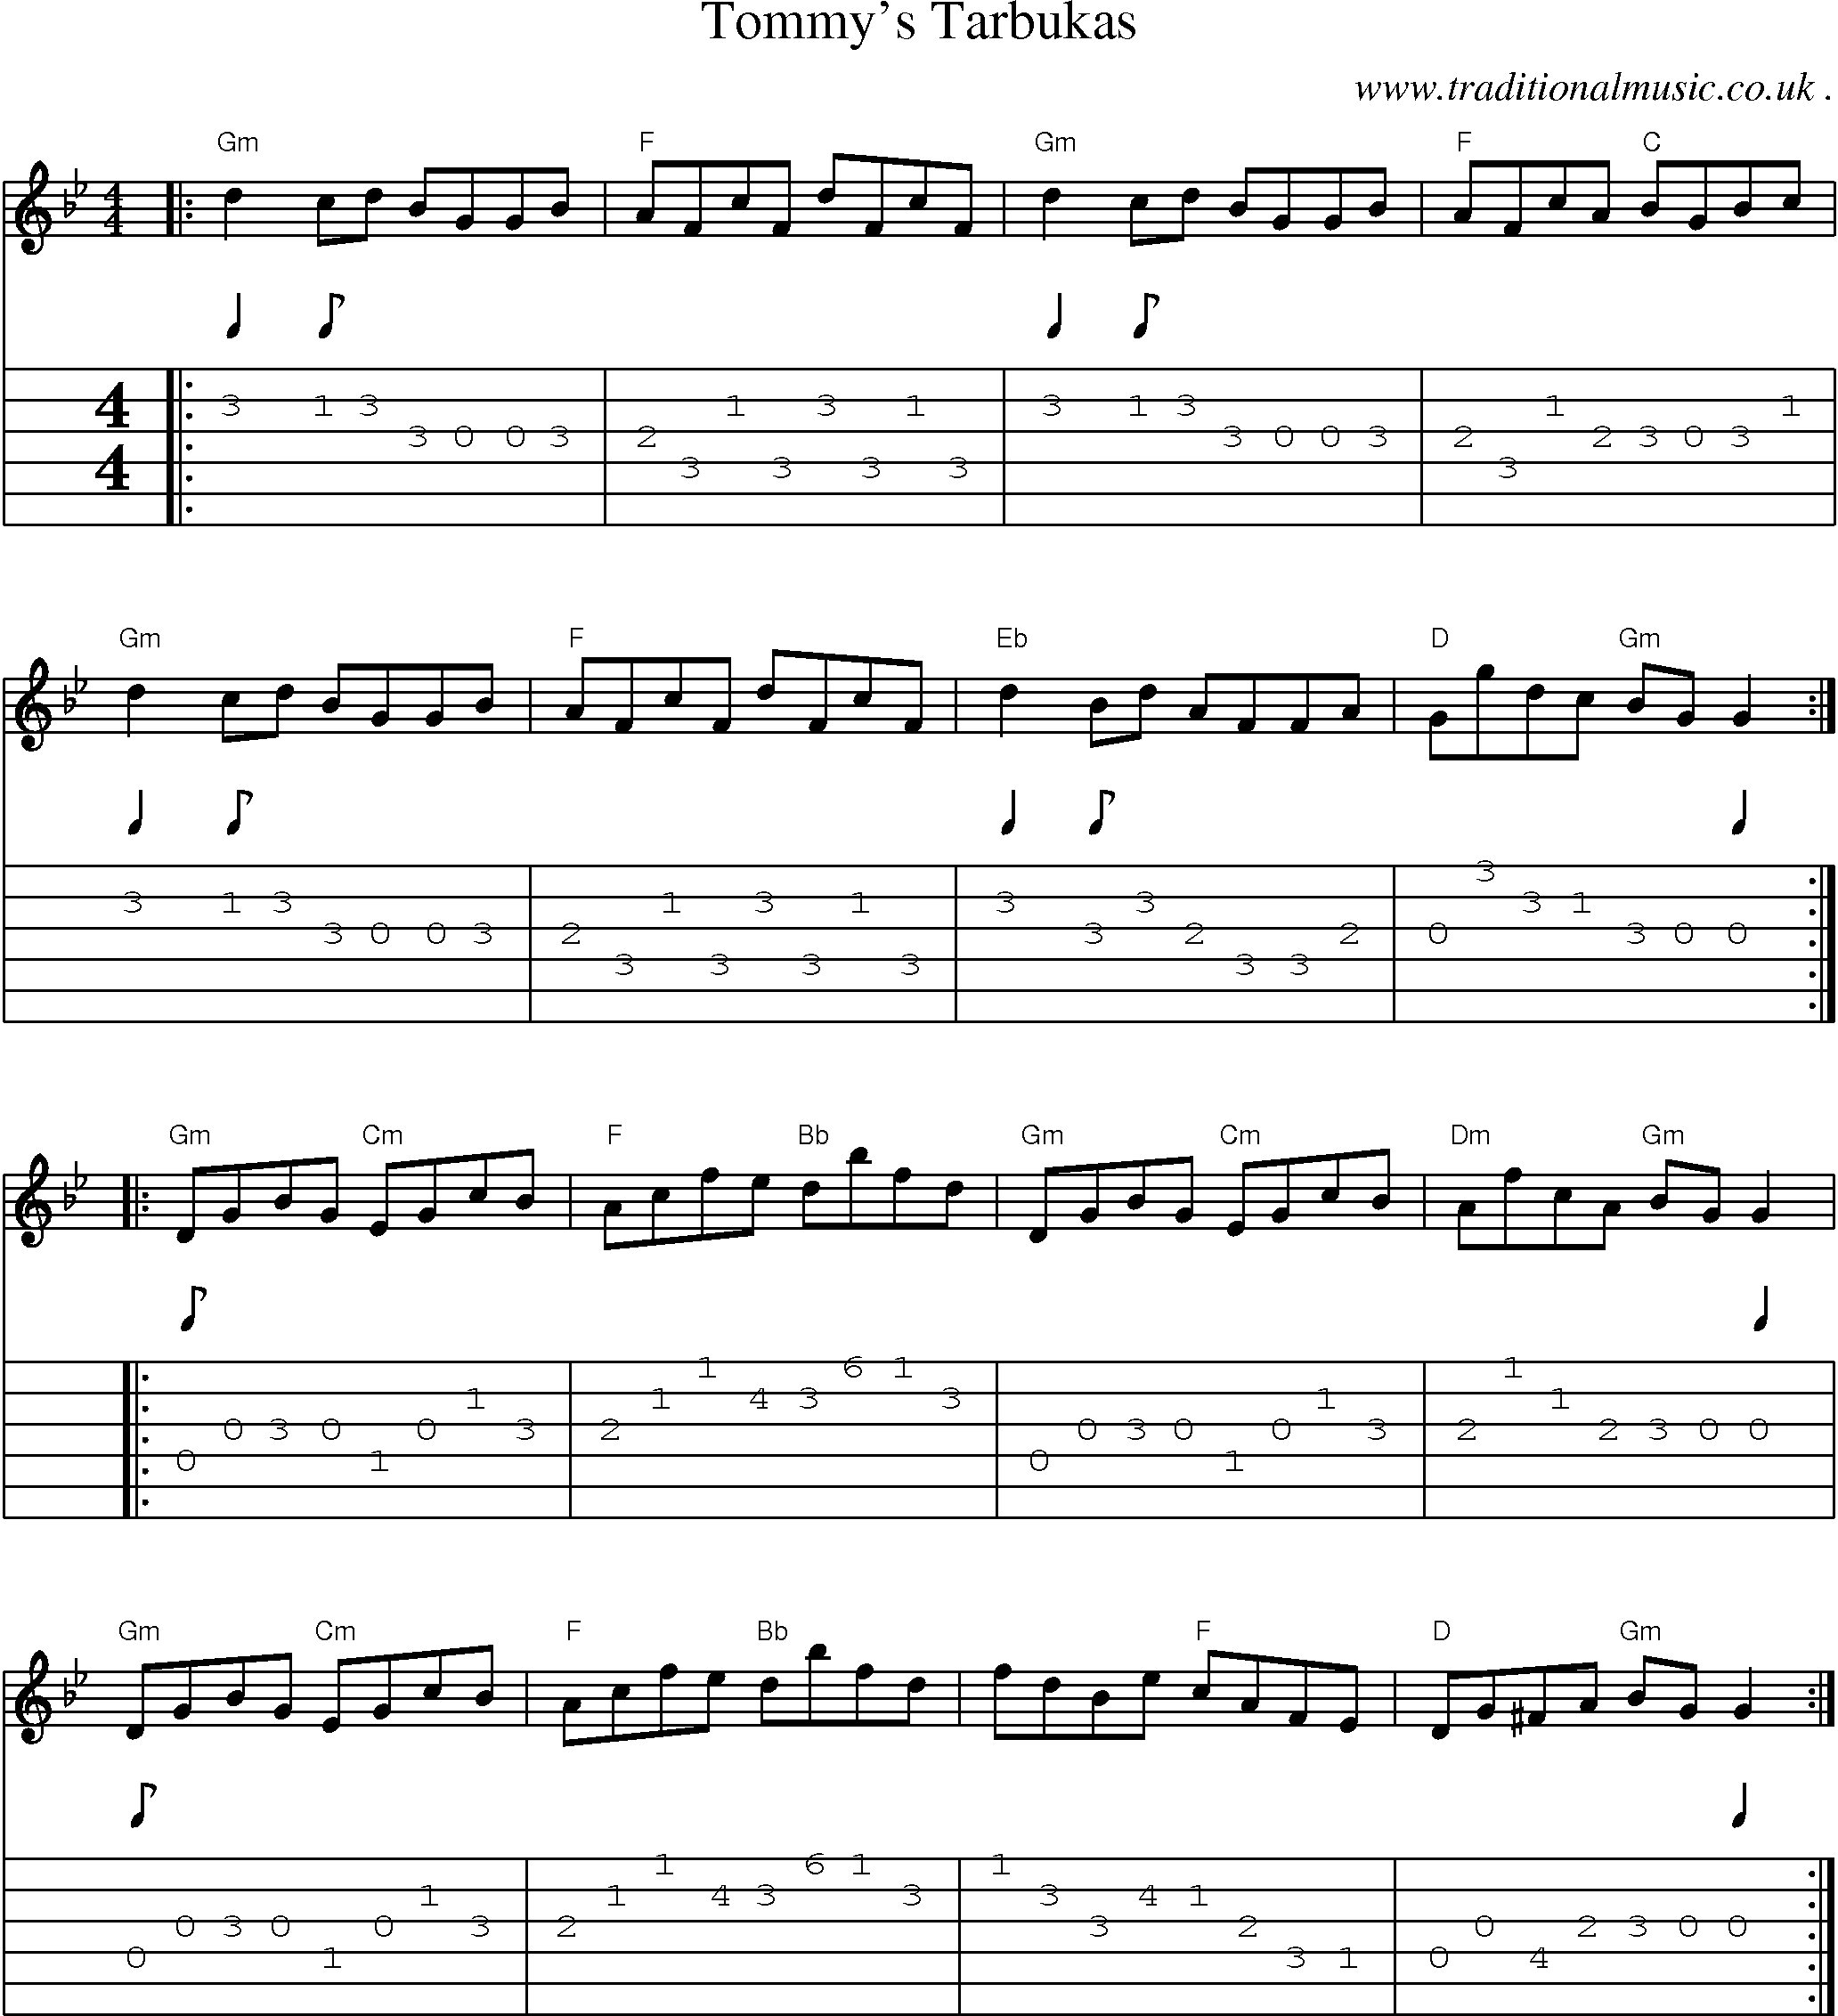 Music Score and Guitar Tabs for Tommys Tarbukas